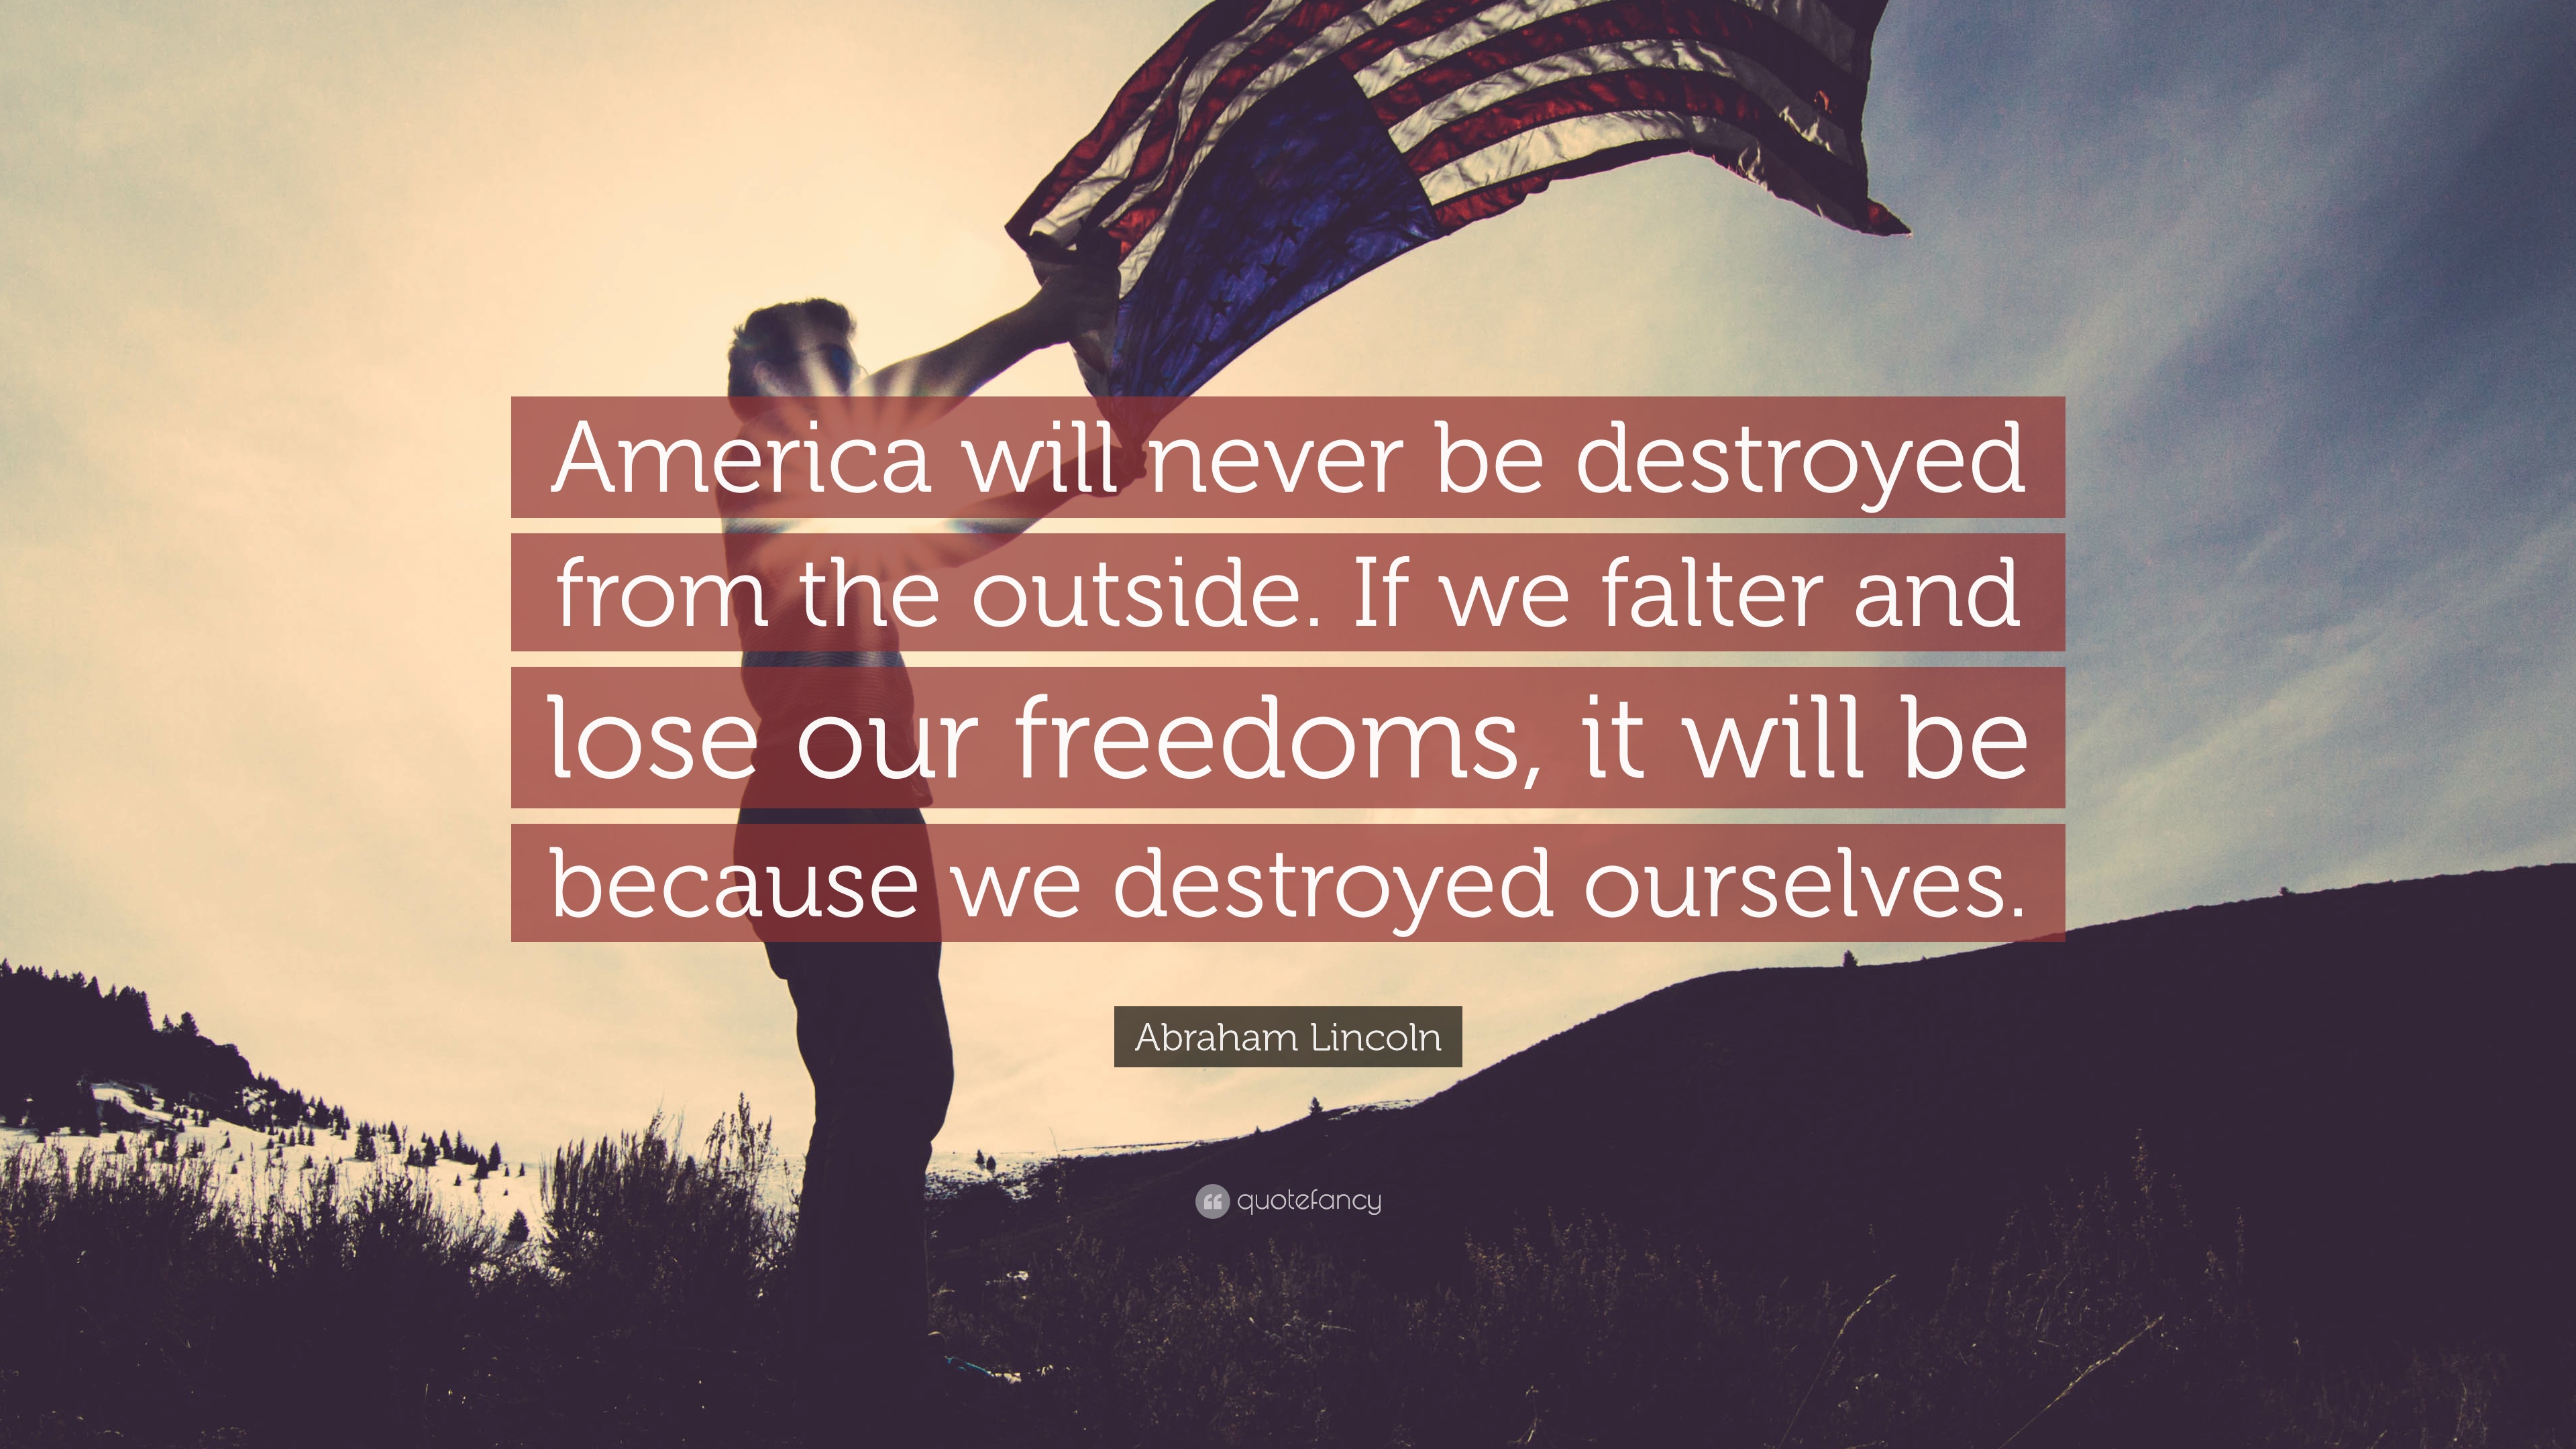 Abraham Lincoln Quote: “America will never be destroyed from